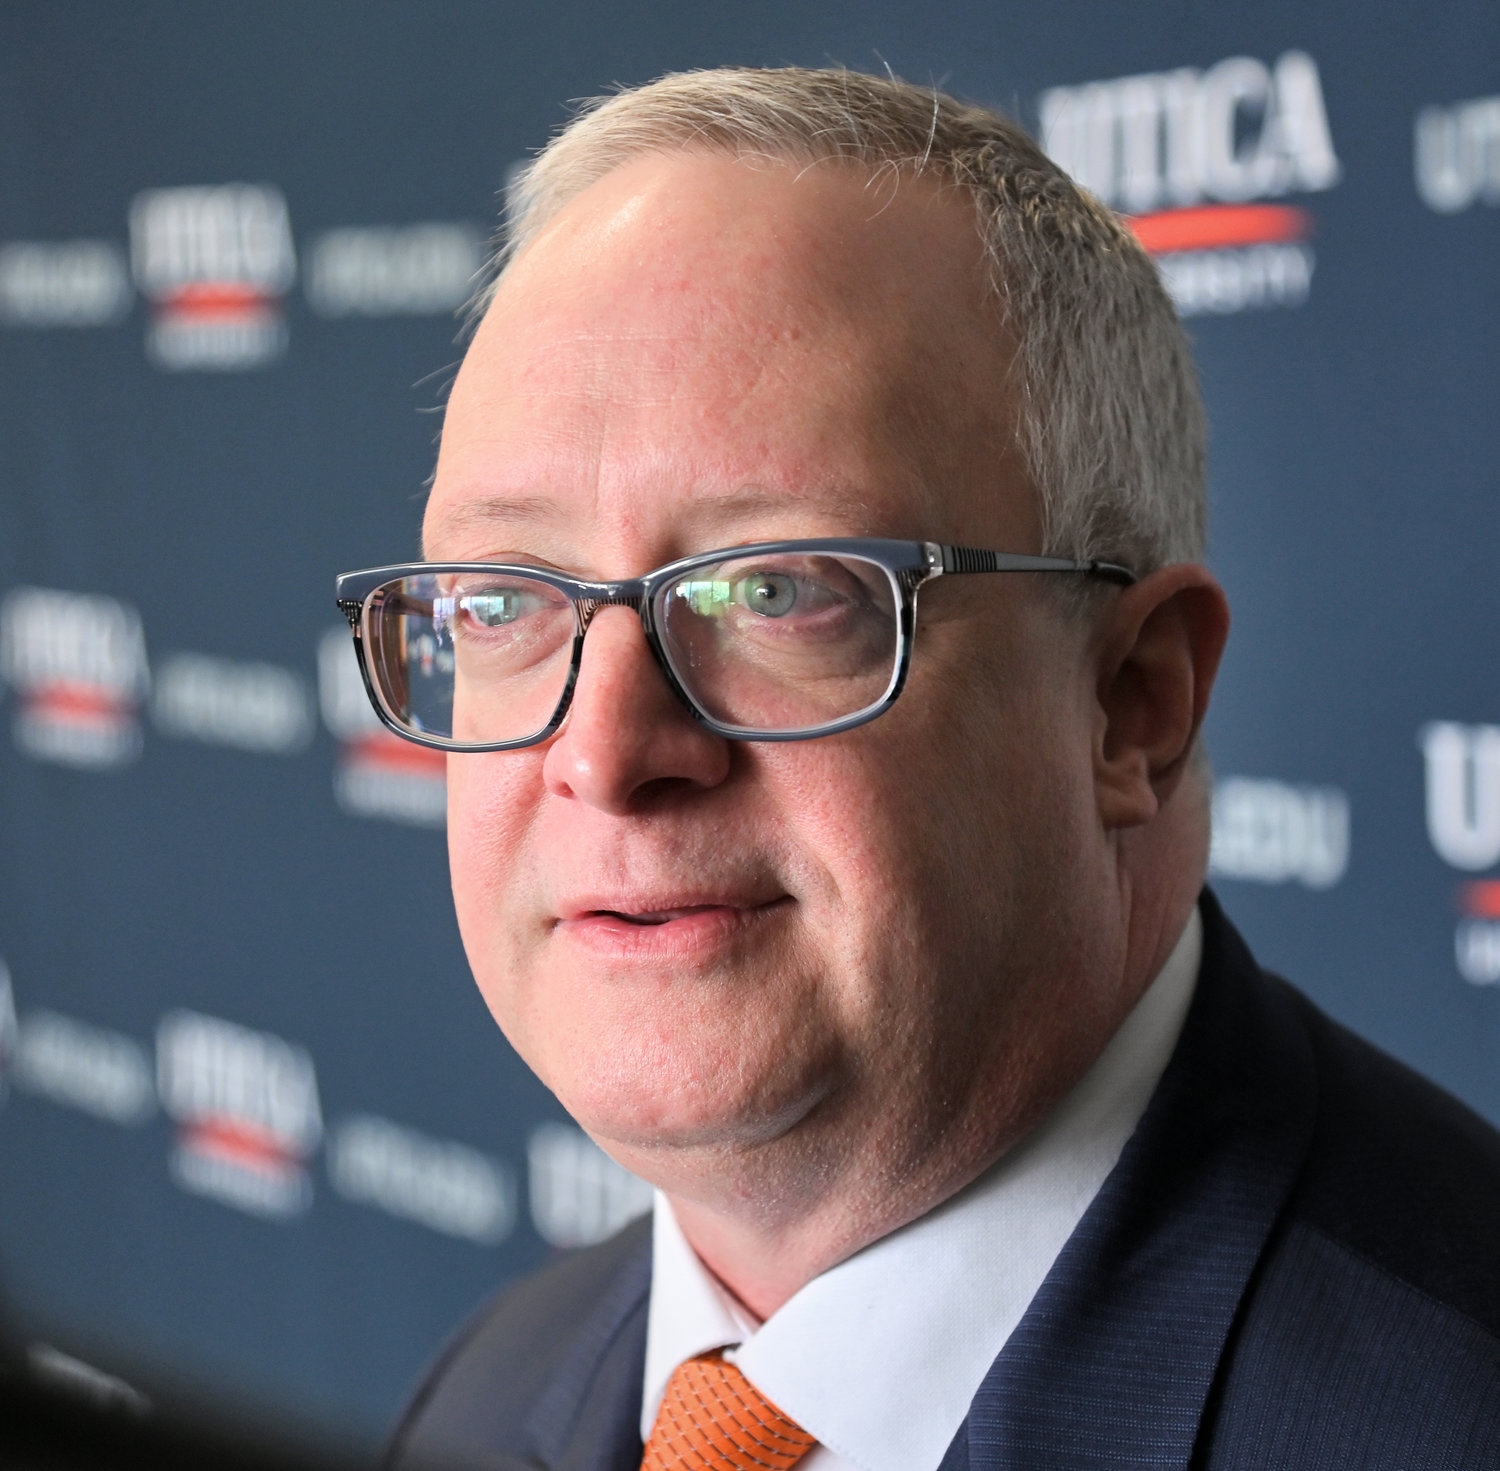 Todd Pfannestiel listens to questions Monday, Feb. 27 during the announcement of his selection as the 10th president of Utica University.